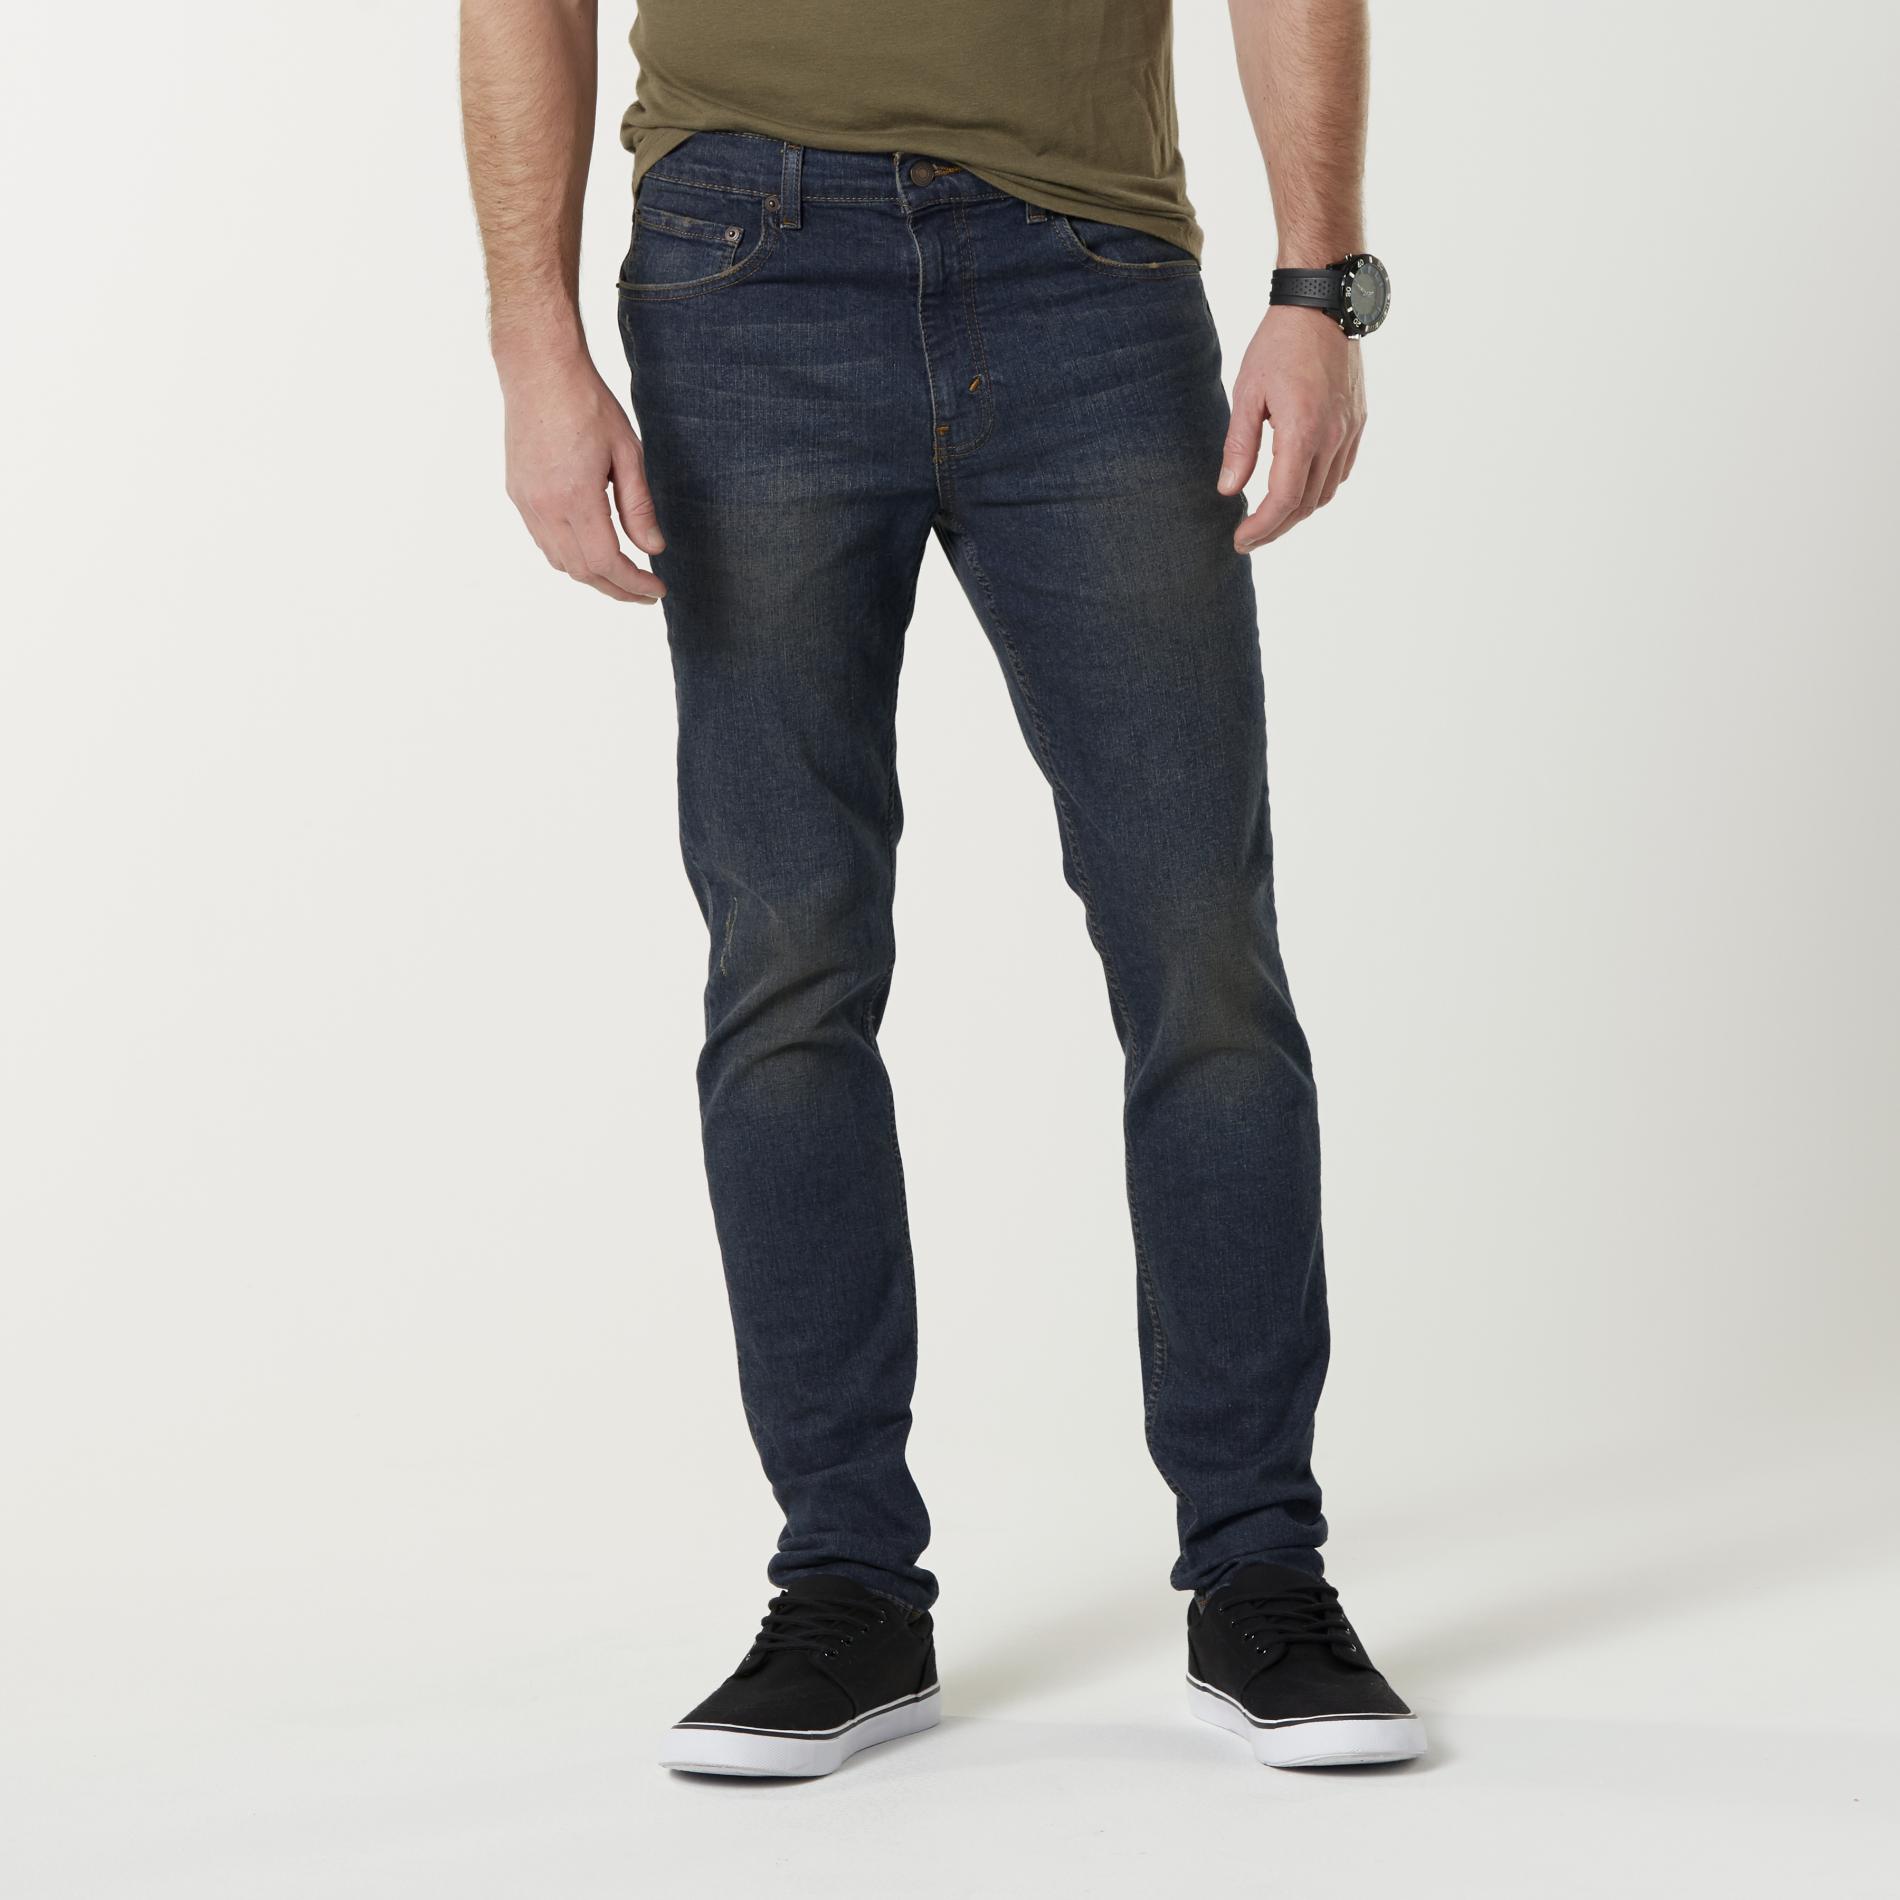 Roebuck & Co. Young Men's Skinny Jeans